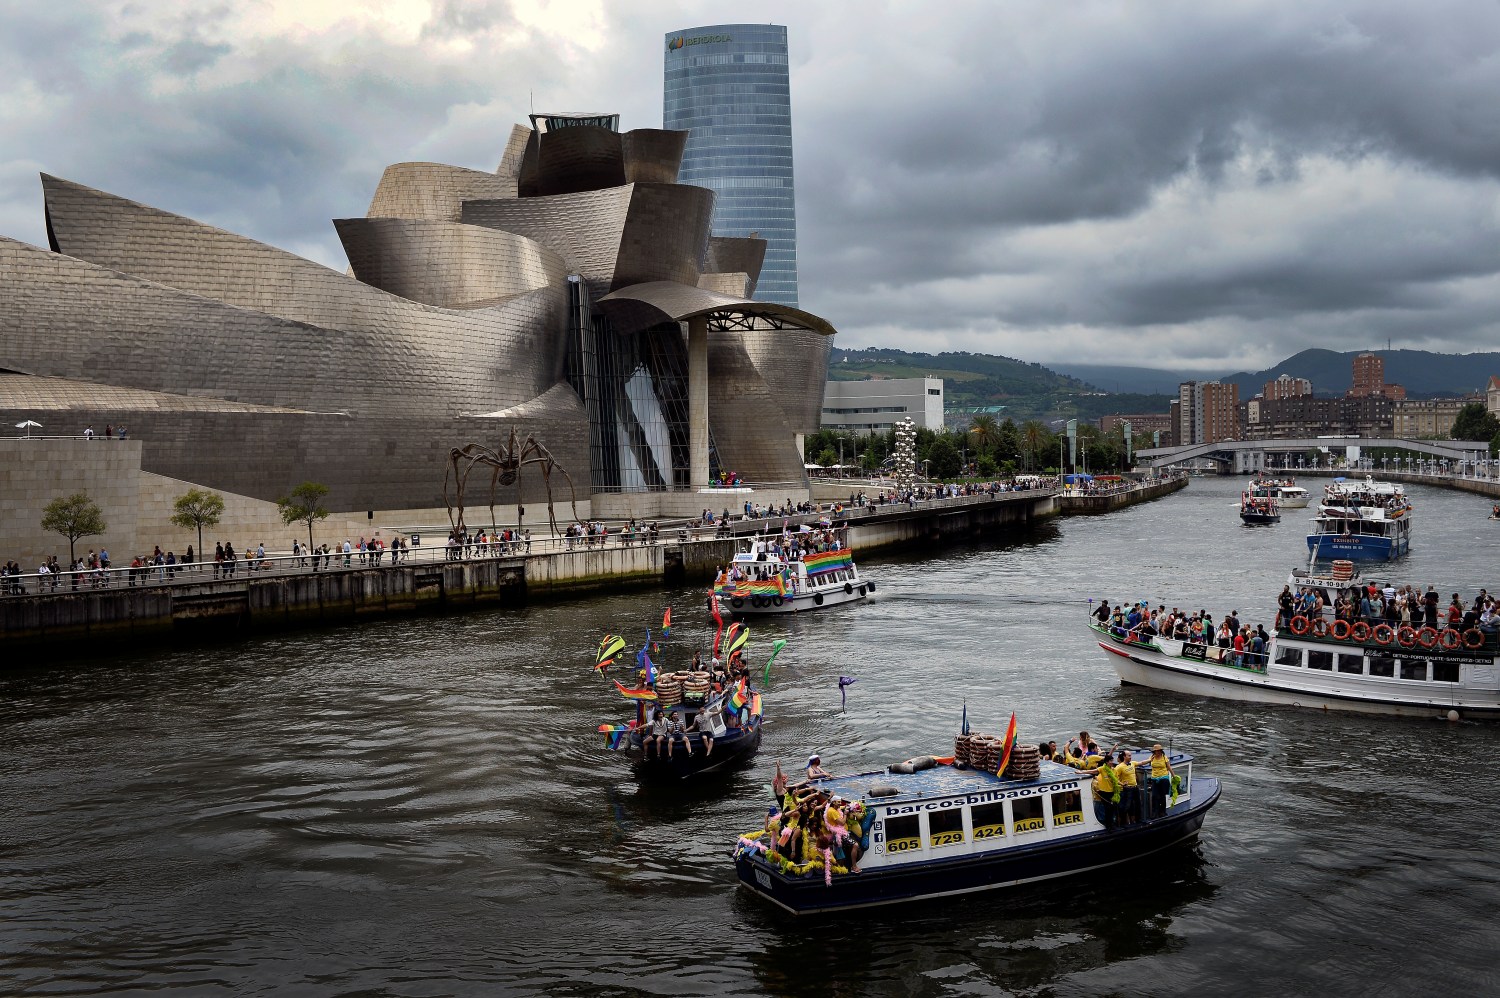 A flotilla of boats takes part in the "Parade For Equality", ahead of WorldPride, an event promoting LGBT issues, on the Nervion River in front of the Guggenheim Museum Bilbao in Bilbao, Spain June 24, 2017. REUTERS/Vincent West - RC1B841435A0